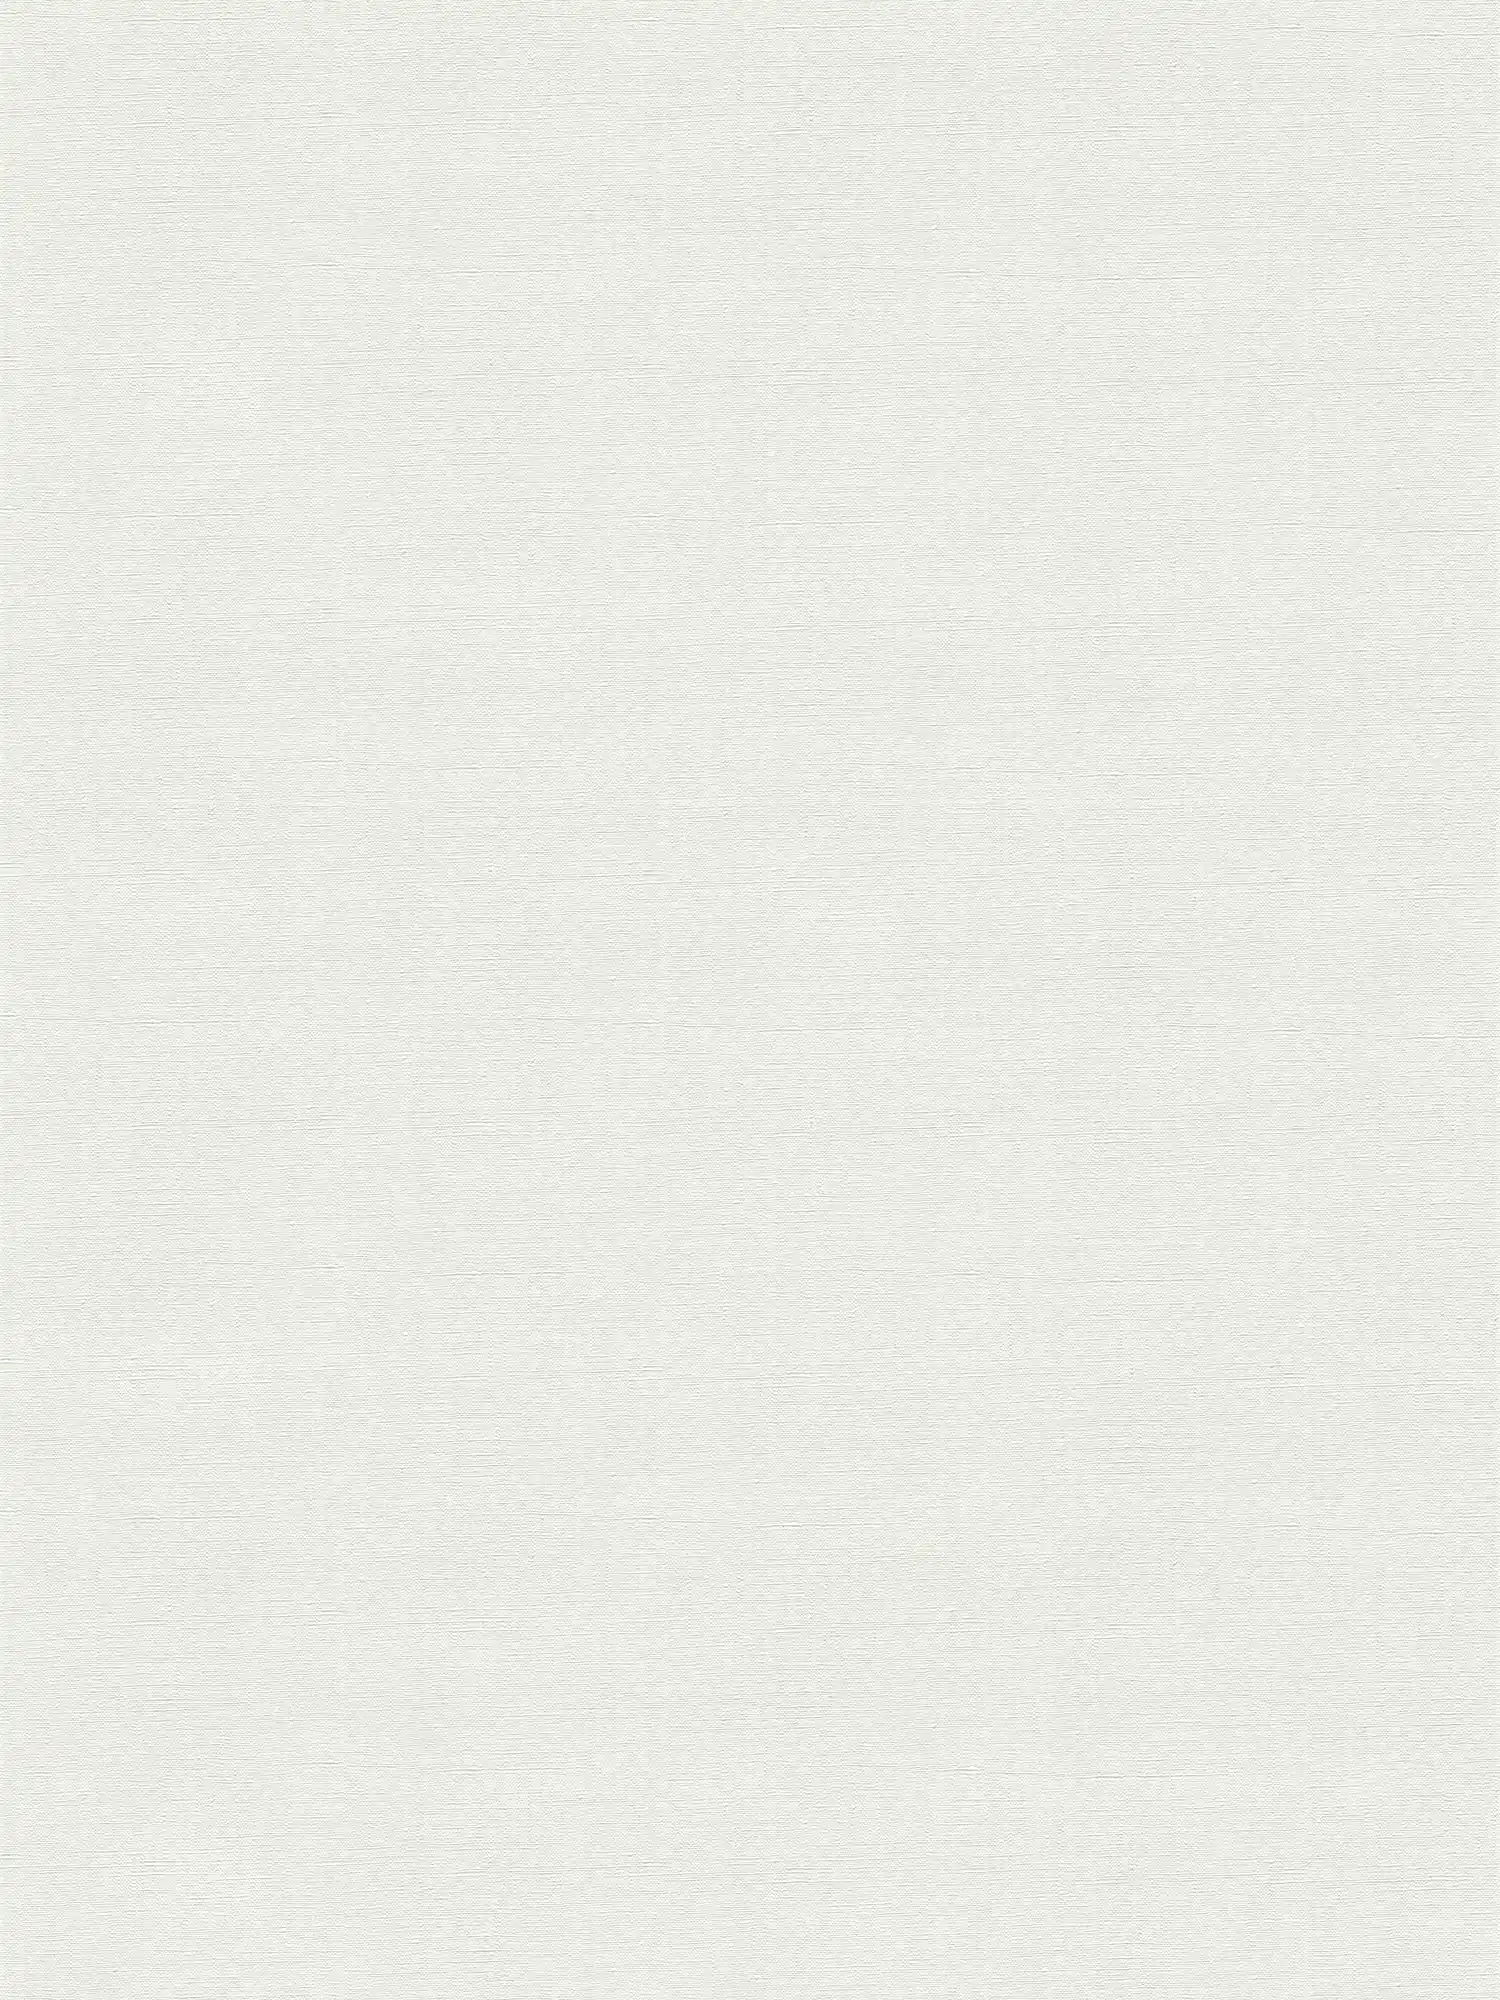 Non-woven wallpaper with fine textured pattern - light grey, white
